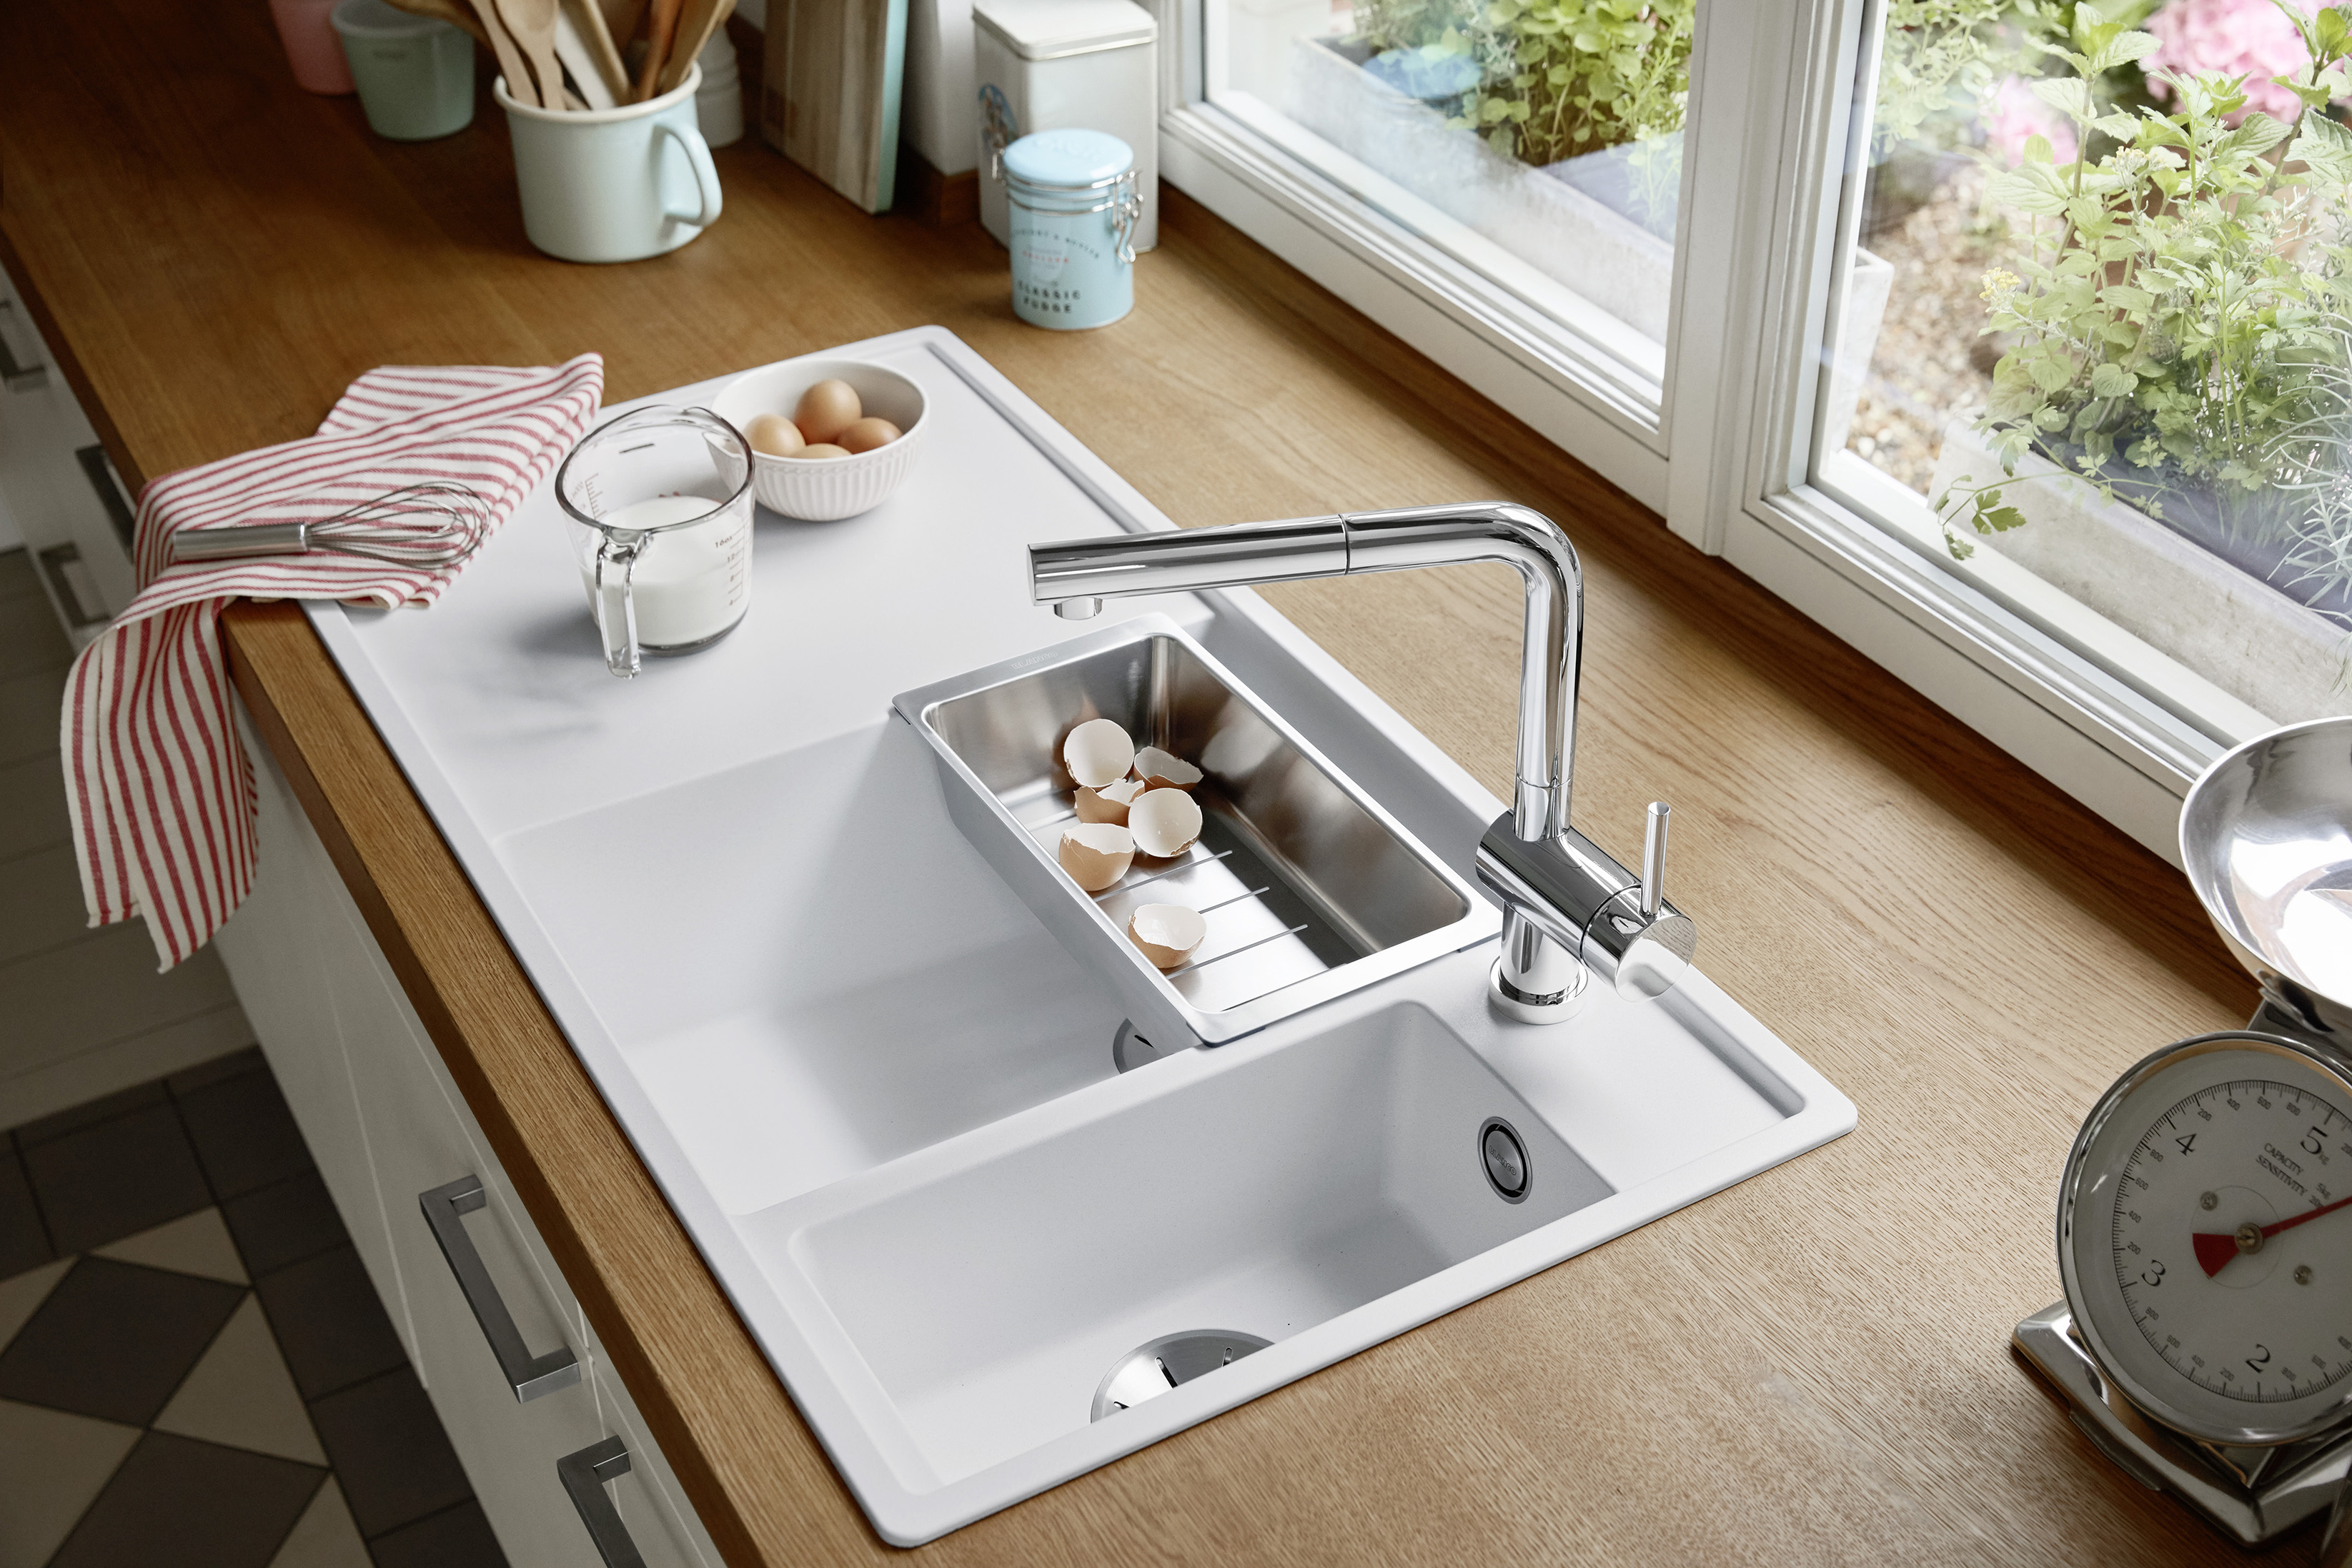 Choose the right sink for your personal kitchen design